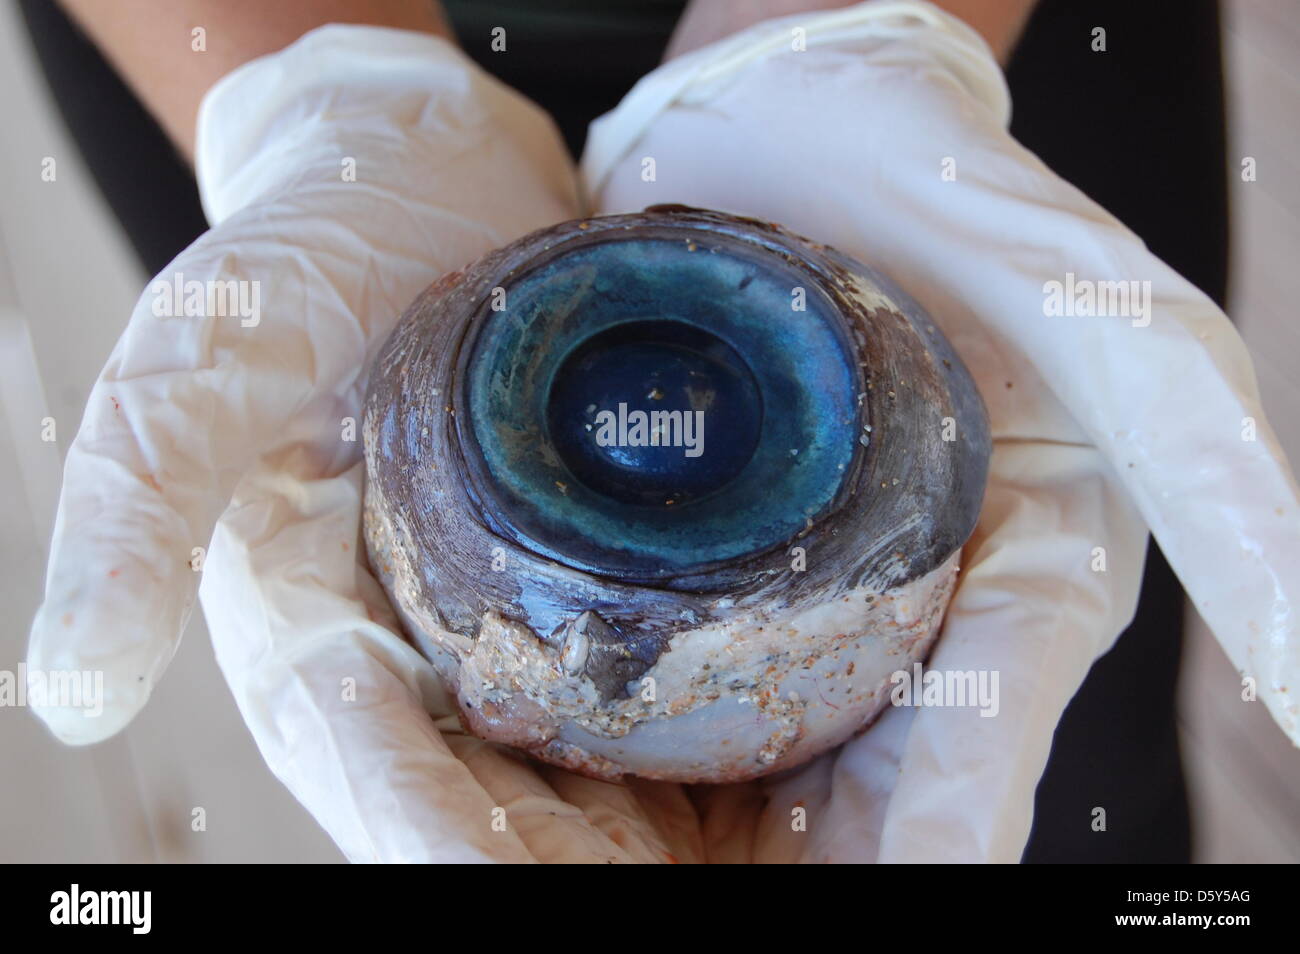 HANDOUT - A handout picture by the FWC shows two hands holding a huge eye that was washed ashore on a beach in the state of Florida, USA, 11 October 2012. The eyeball is the size of a softball was found by a walker at Pompano Beach near Fort Lauderdale on 10 October 2012. The blue eye has now been taken to a laboratory in St. Petersburg for examination. Photo: Florida Fish and Wild Stock Photo